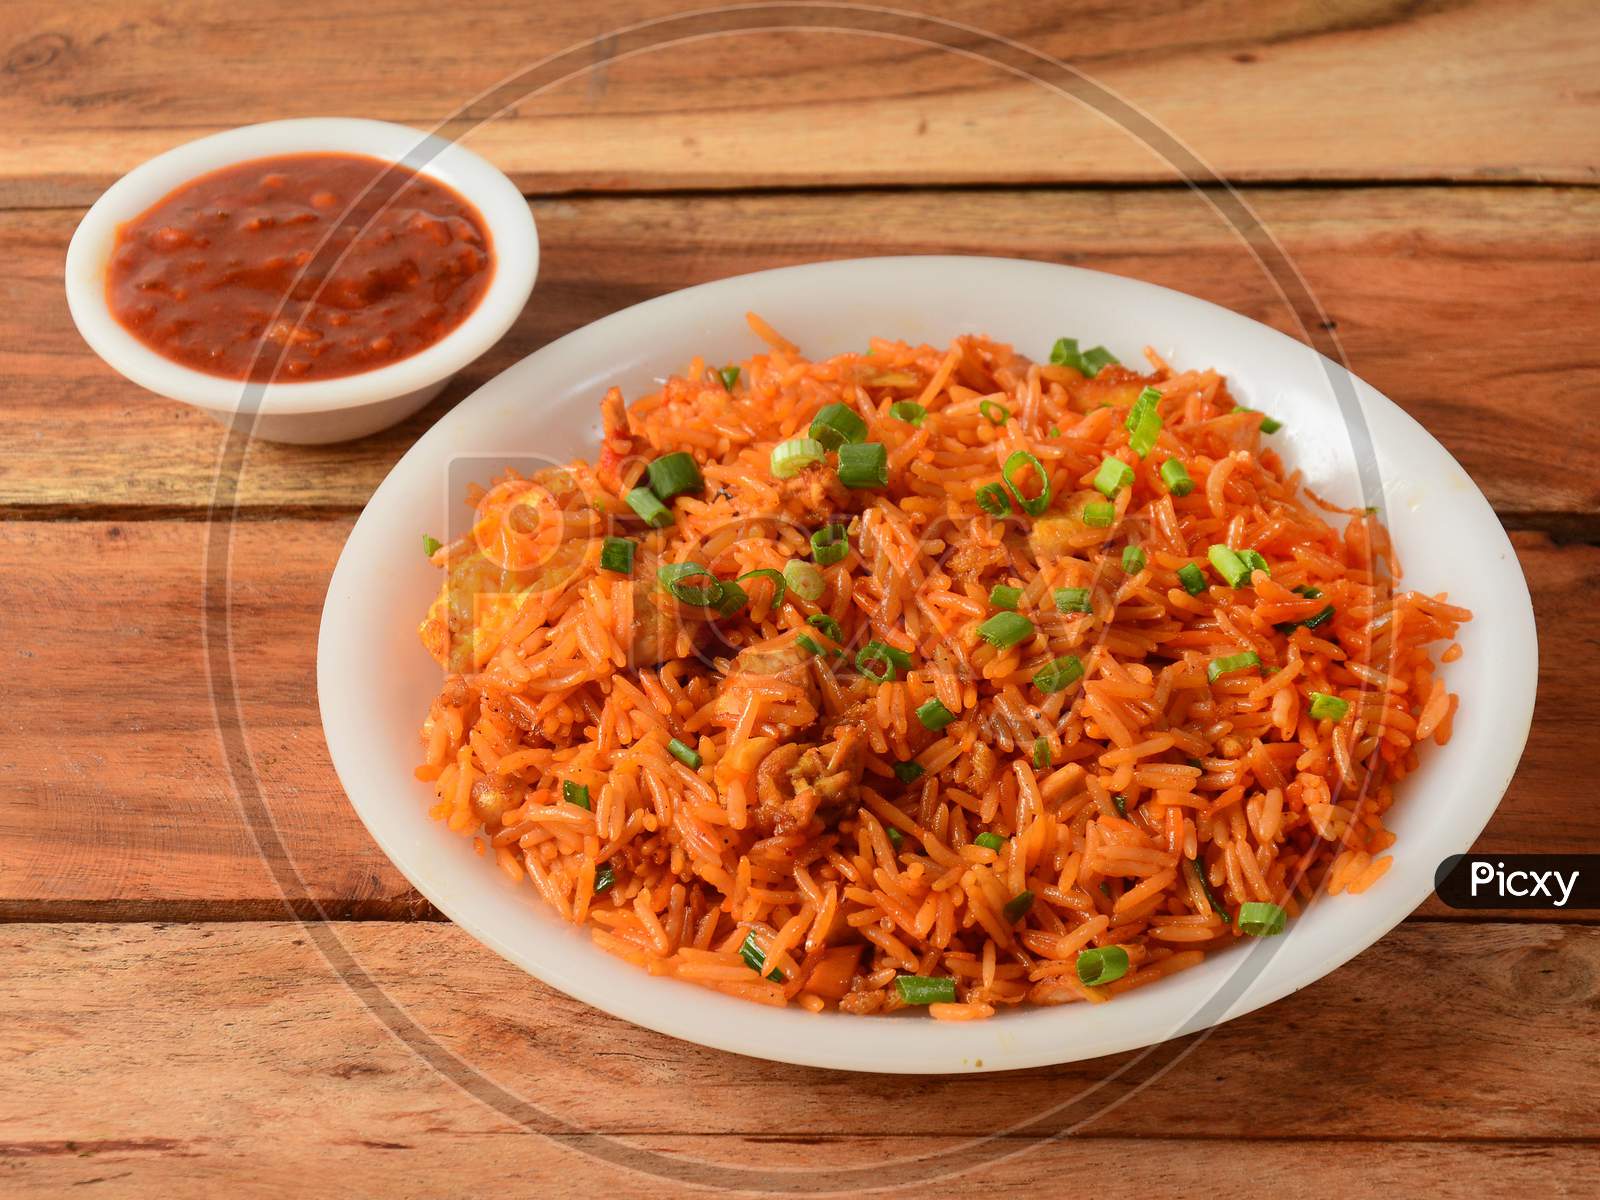 Tasty Schezwan Chicken Fried Rice With Tomato Sauce Served In White Bowl Over A Rustic Wooden Background, Indian Cuisine, Selective Focus